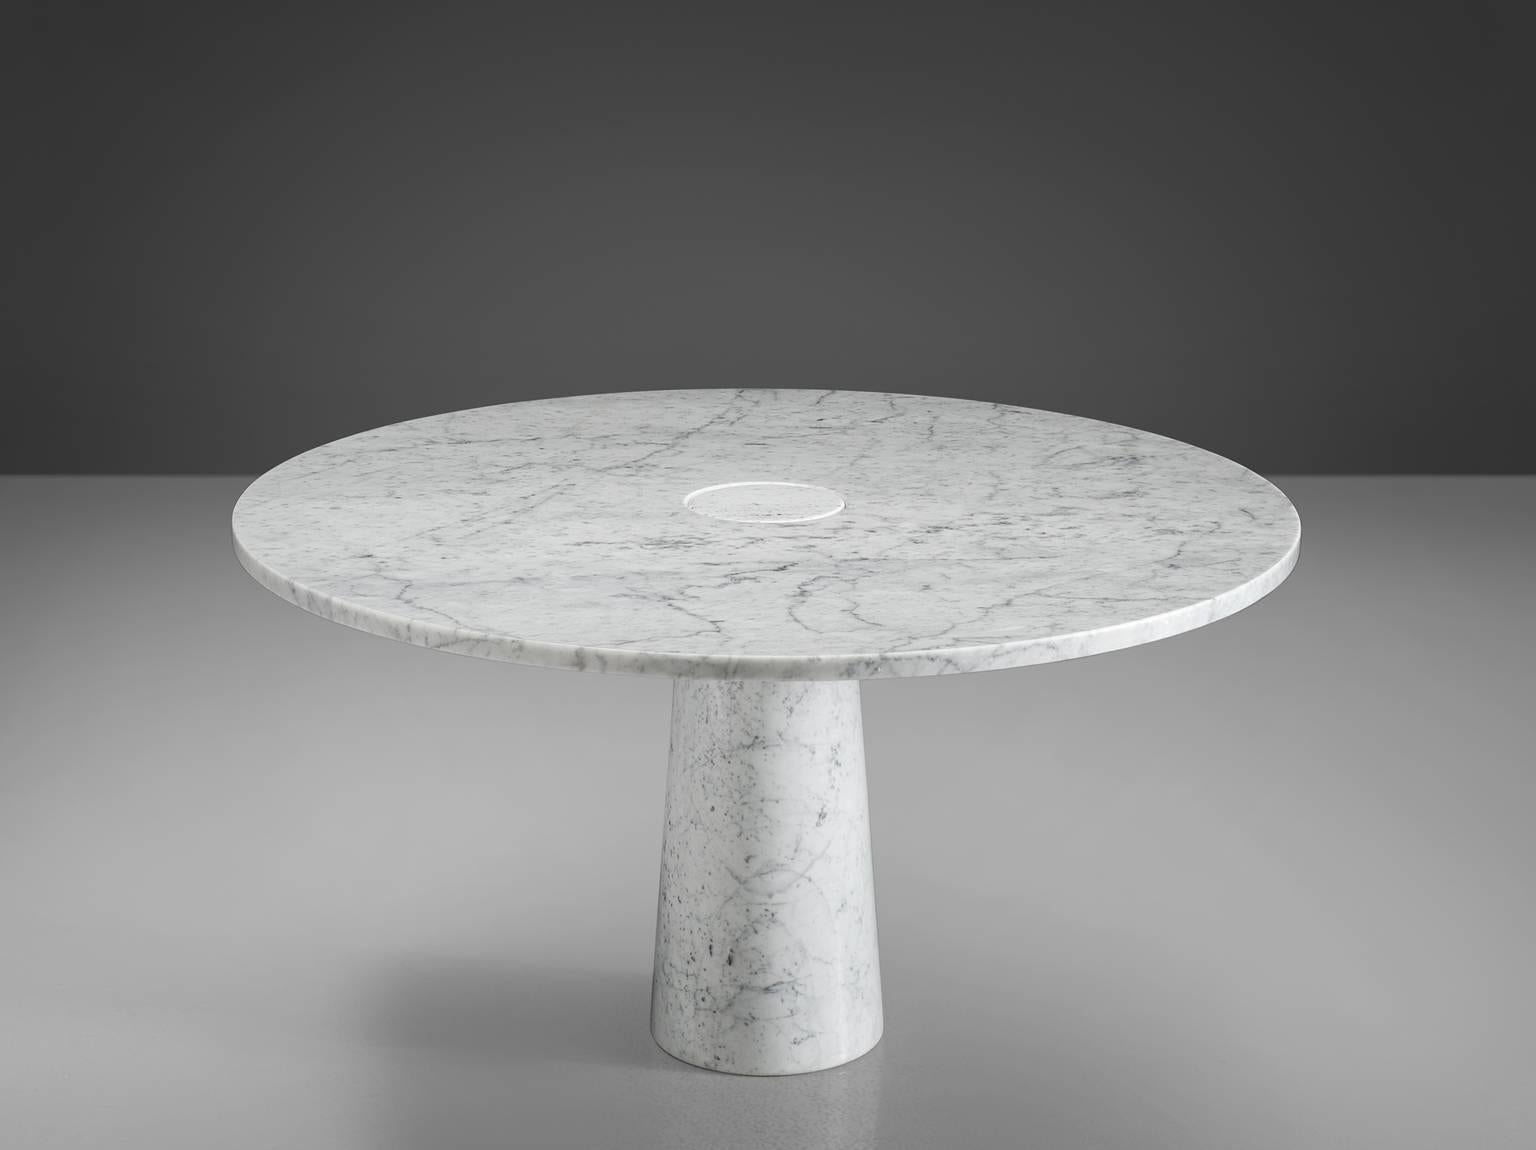 Dining table, marble, Italy, 1970s. 

This architectural table is a skillful example of postmodern design. The circular table features no joints or clamps and is architectural in its structure featuring one single column that is attached to the